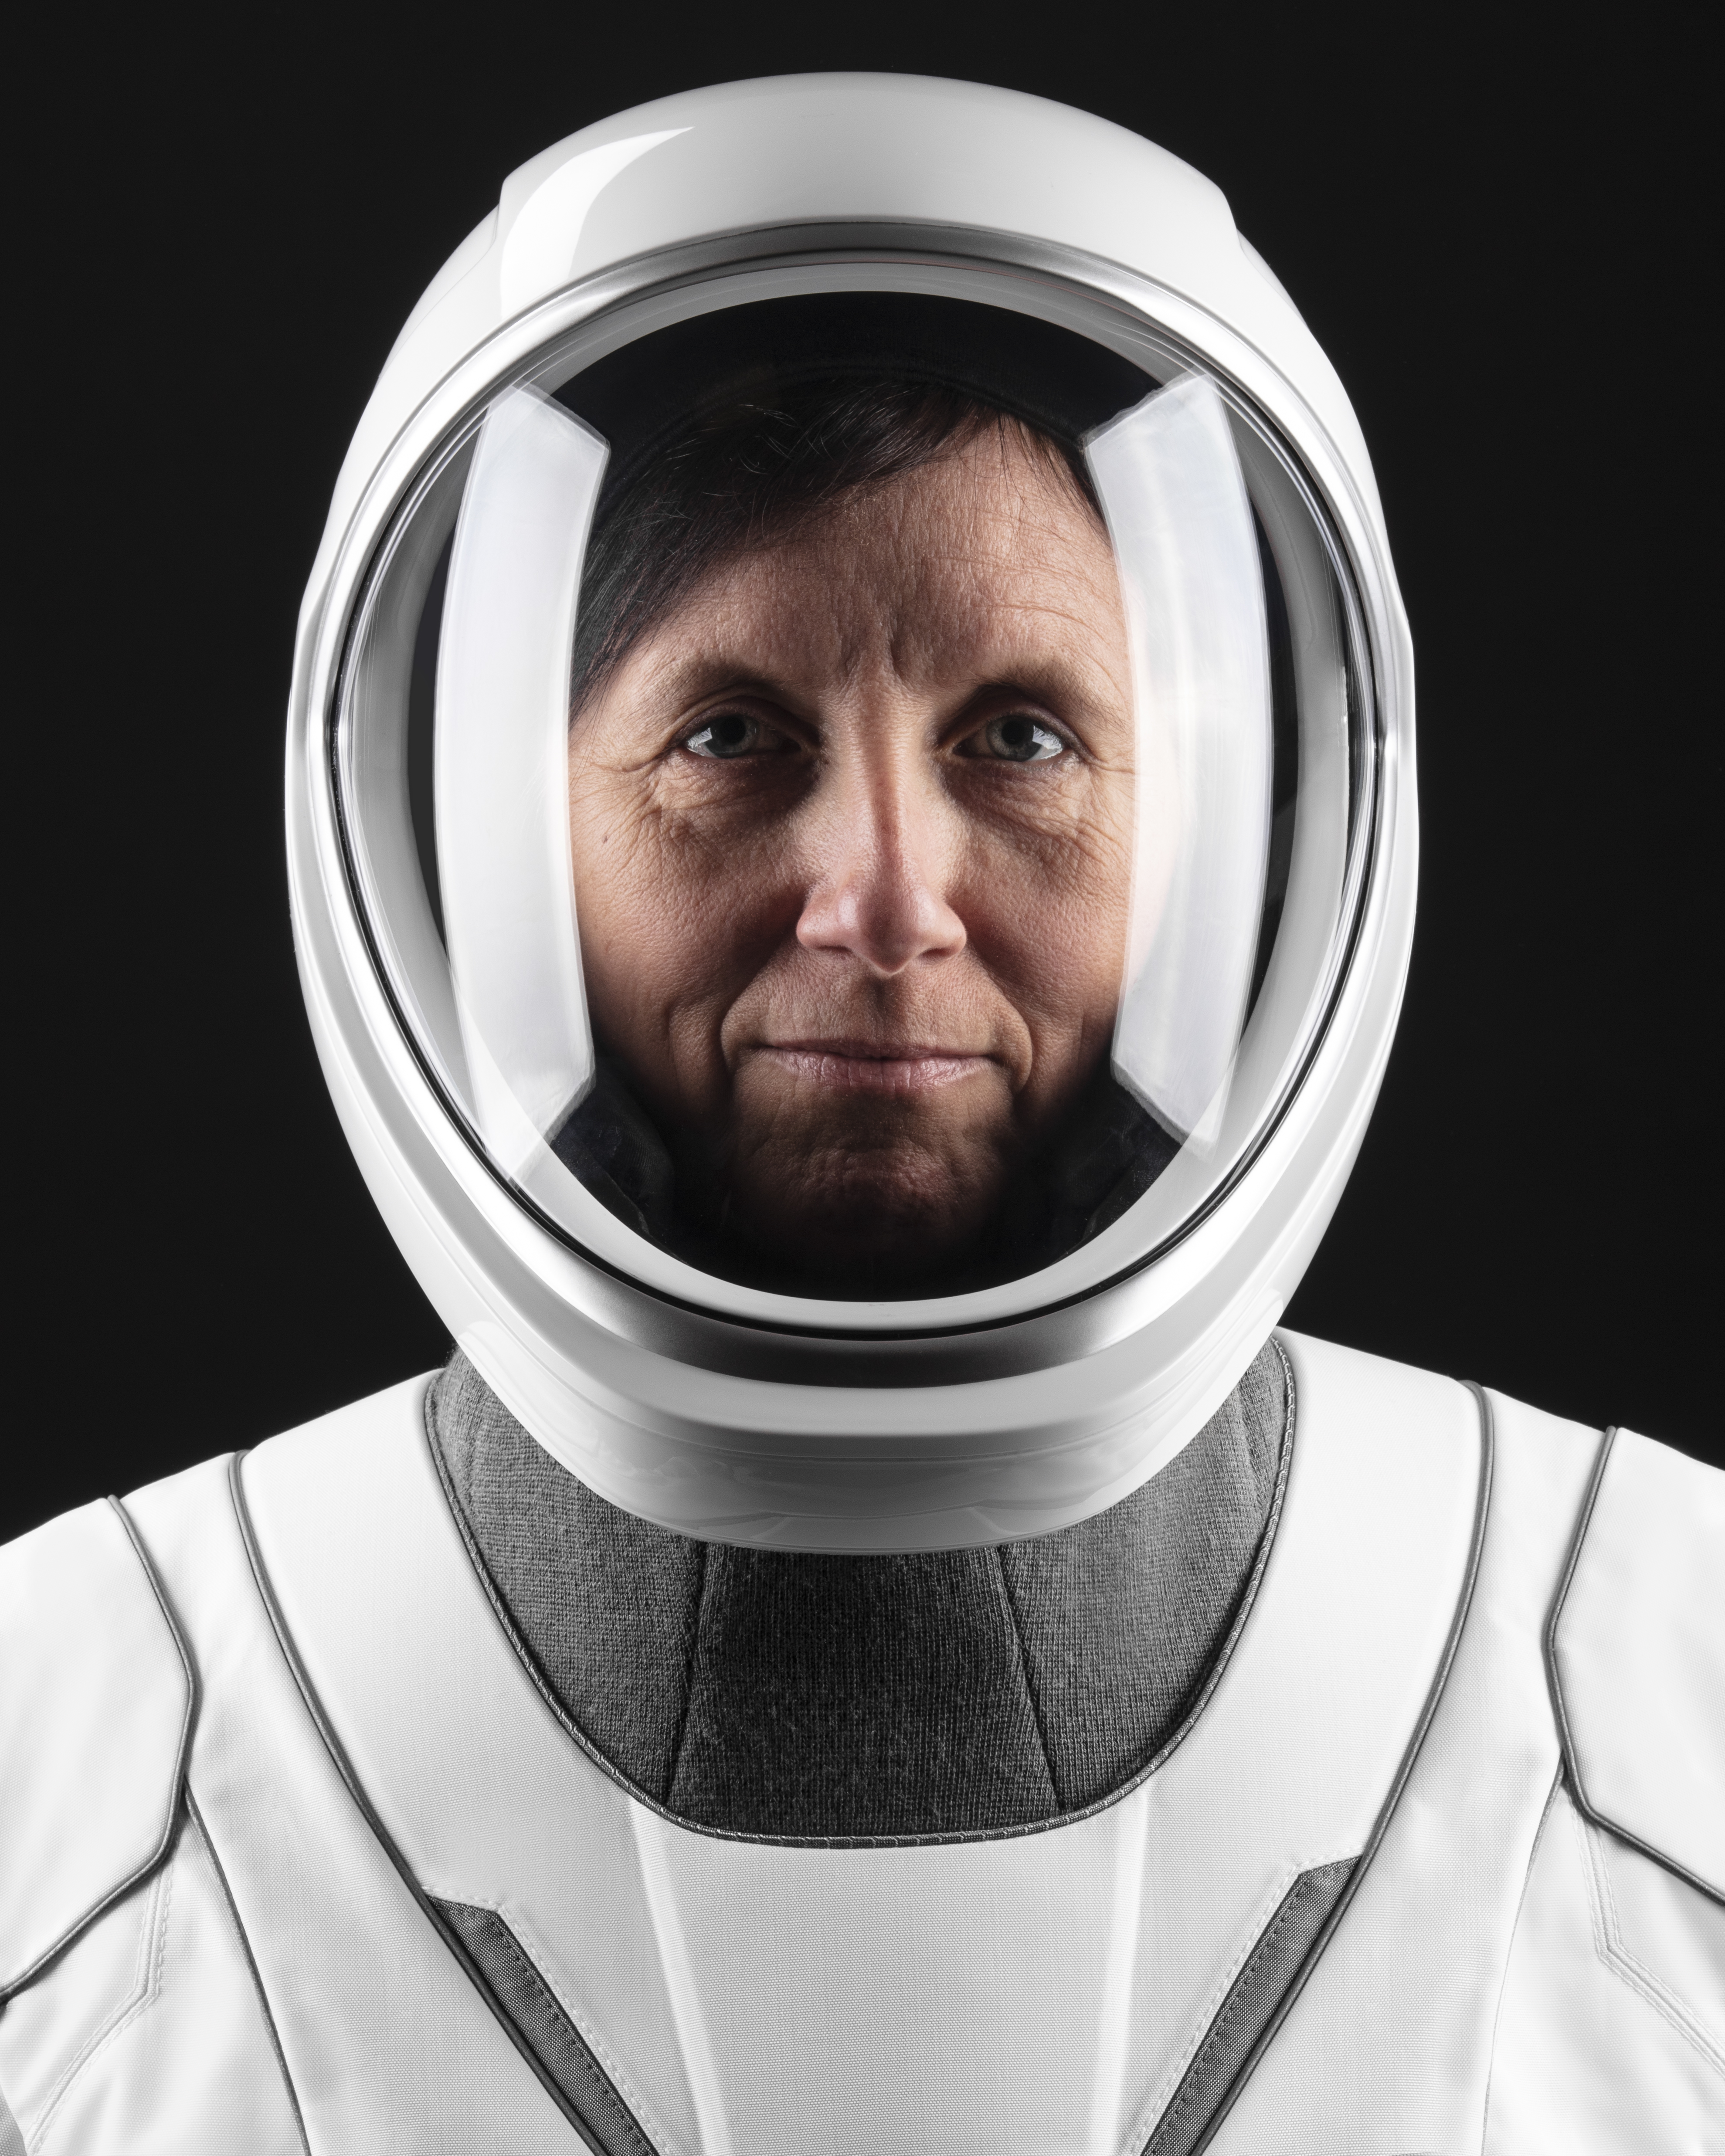 NASA's SpaceX Crew-1 Mission Specialist Shannon Walker is photographed in her SpaceX spacesuit.